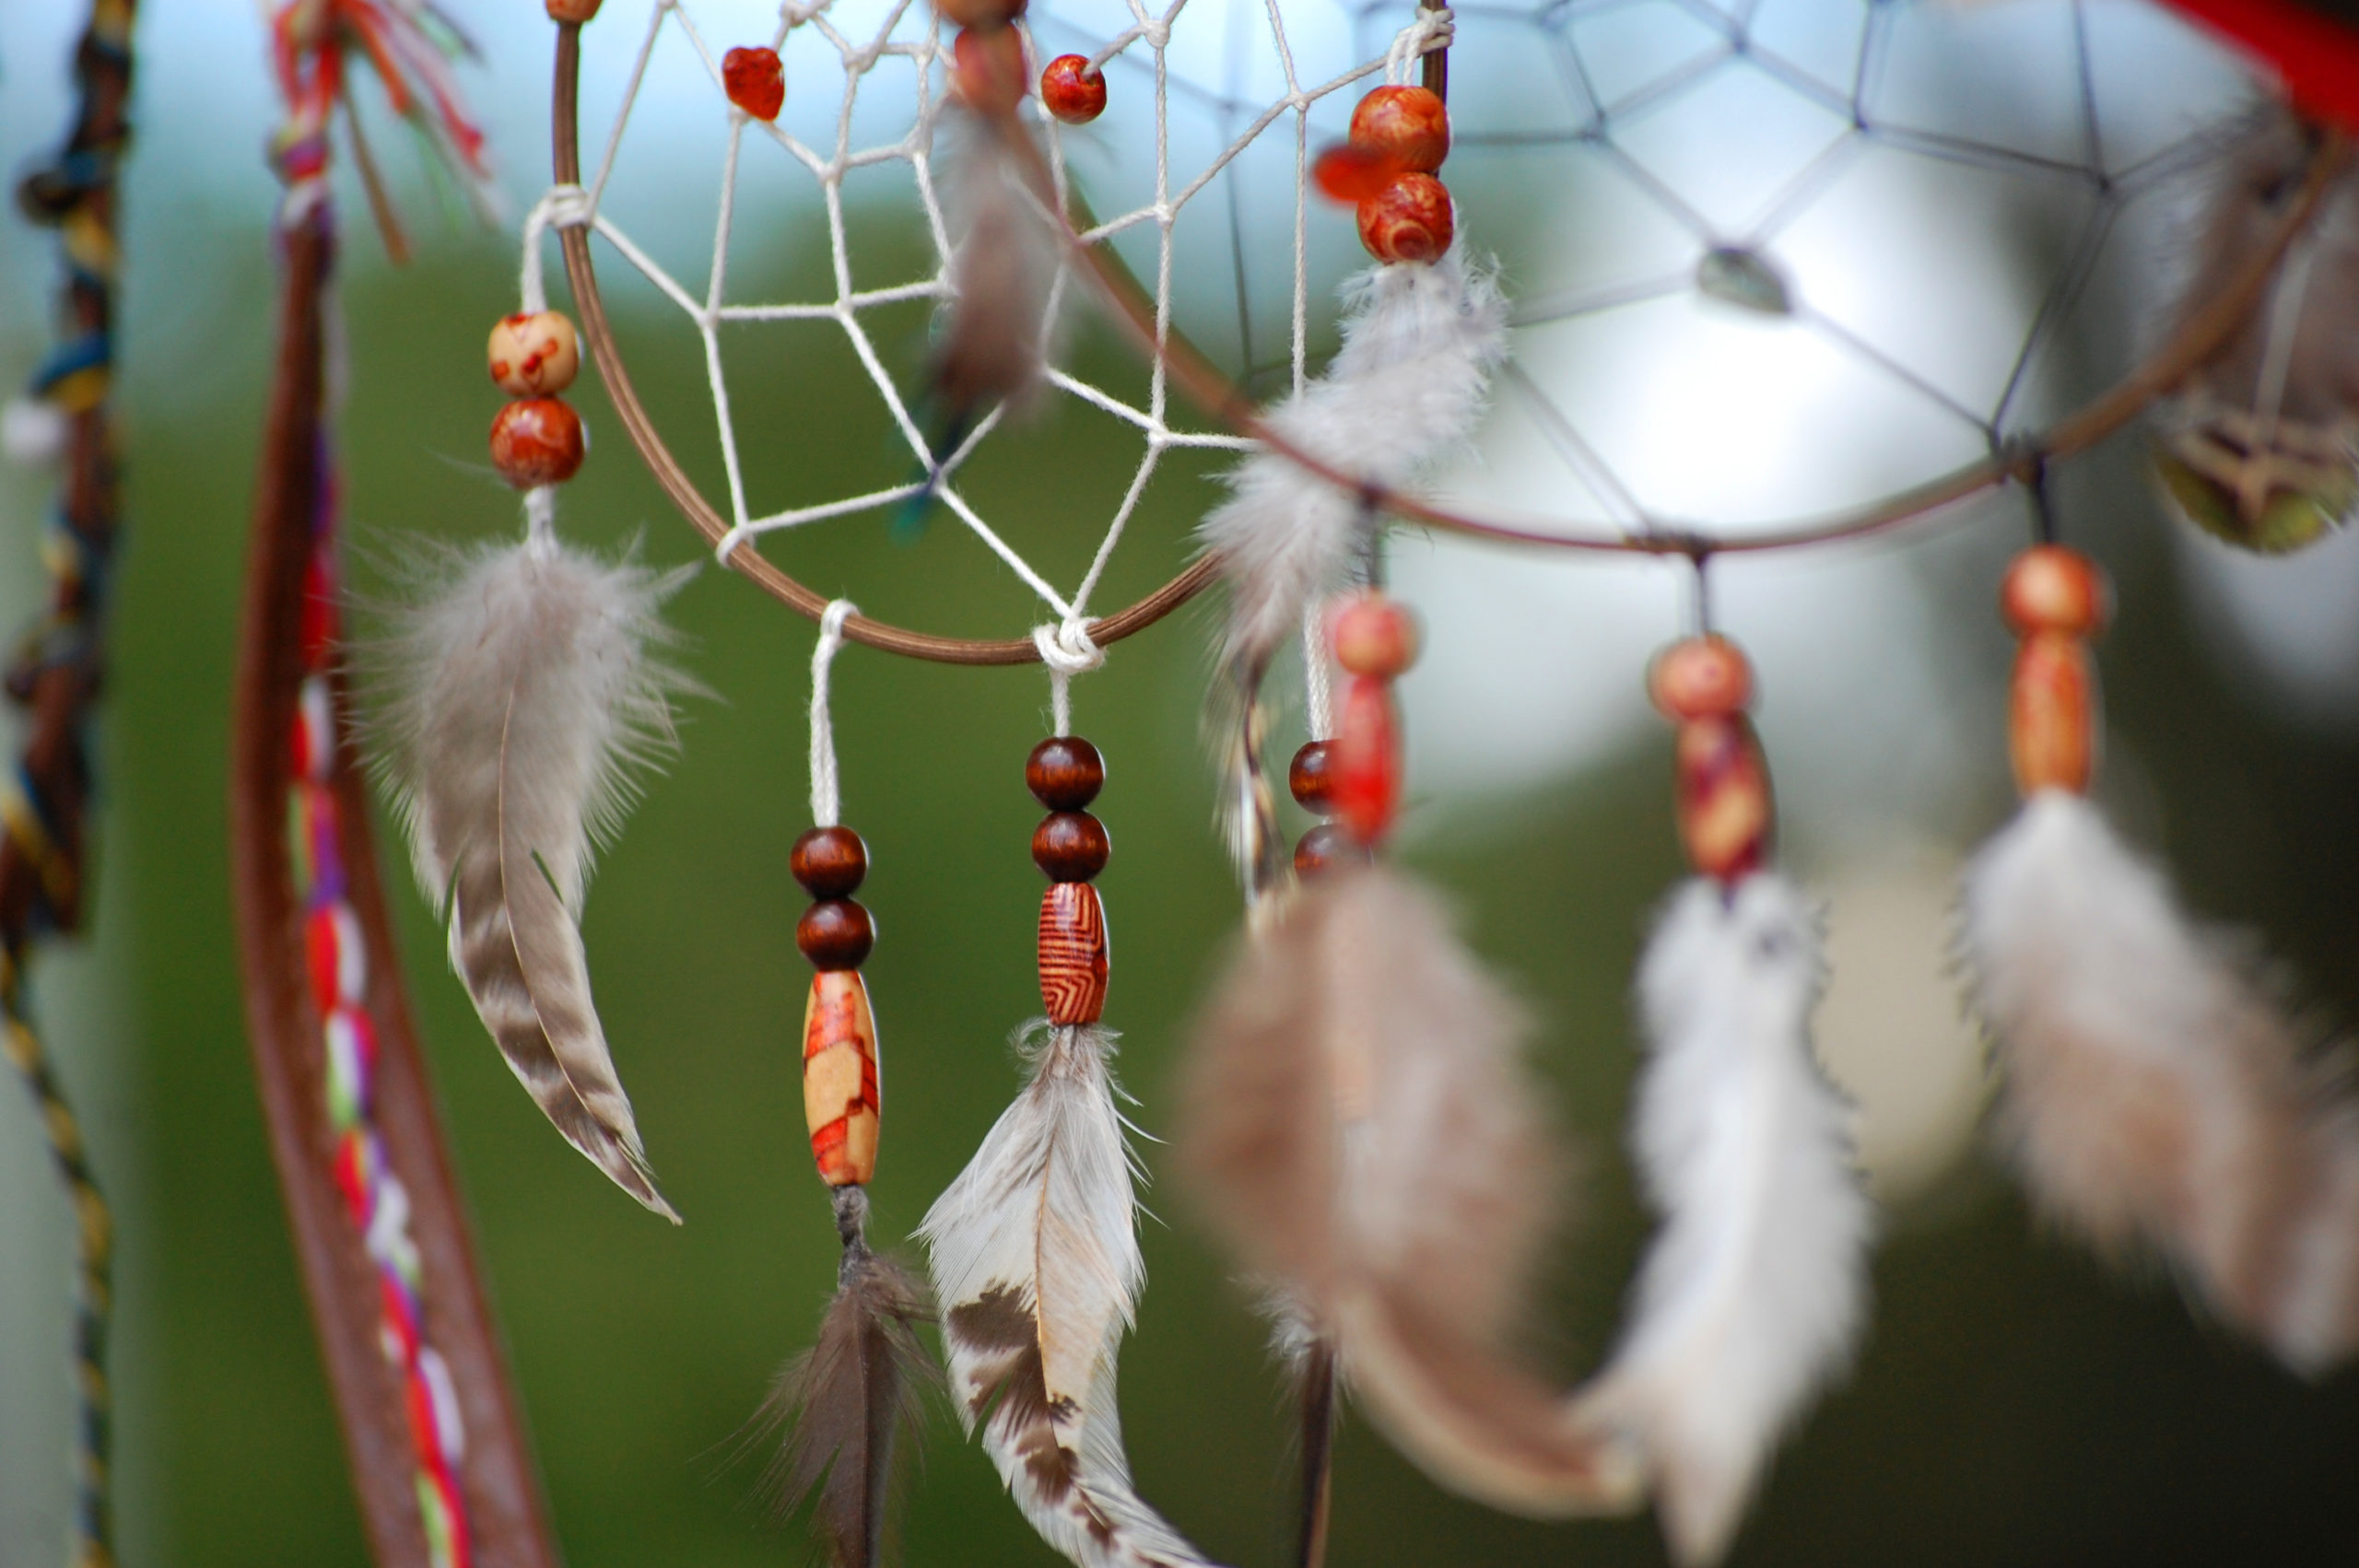 dream catchers for freeing minds